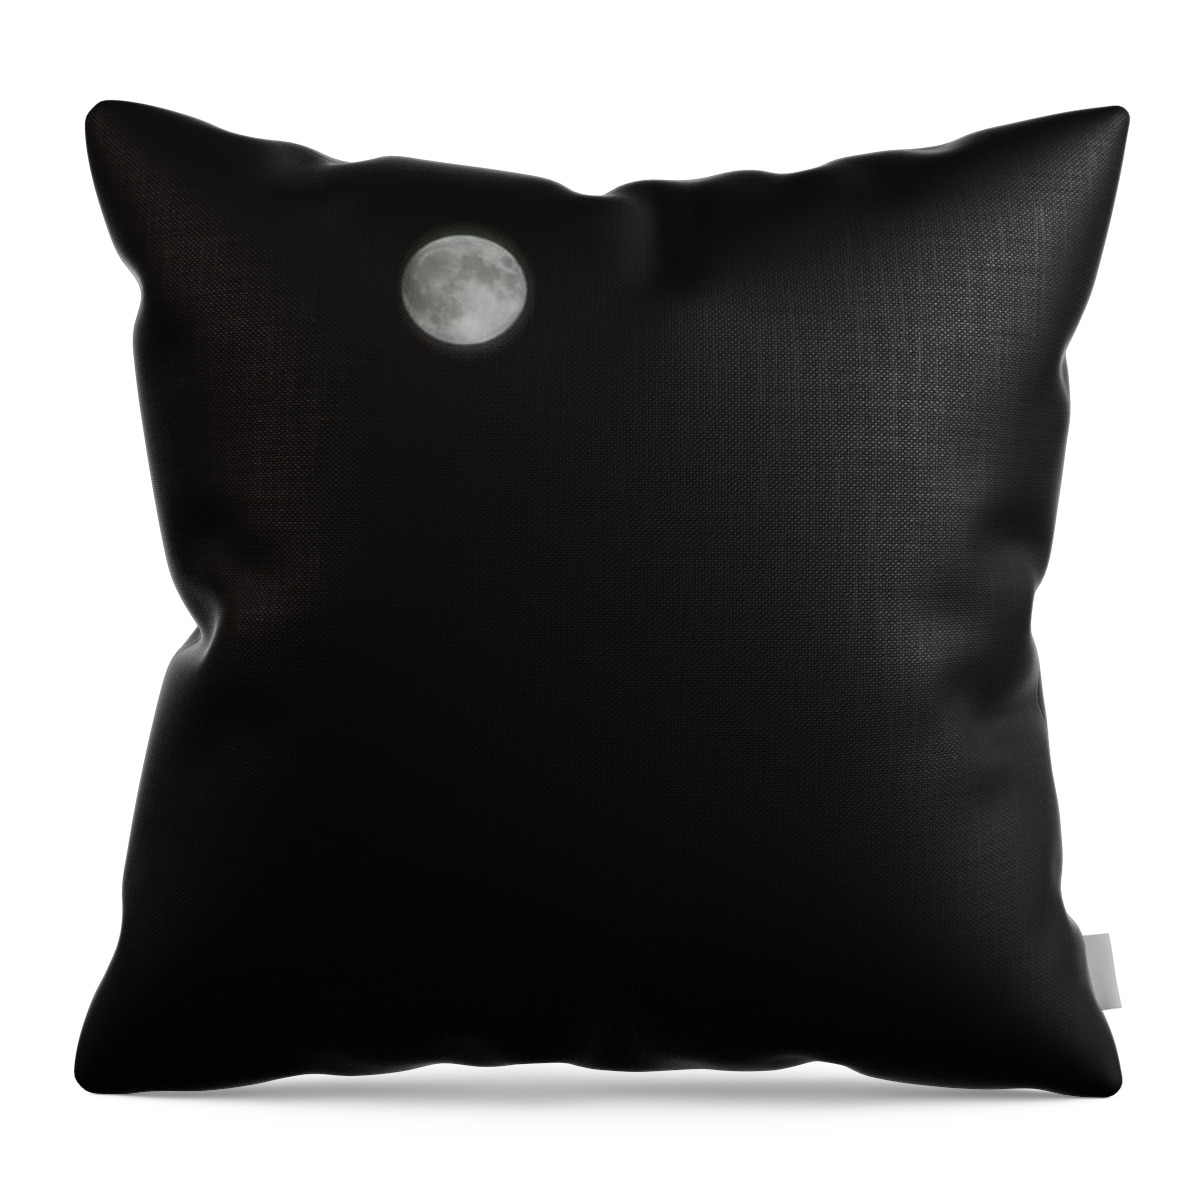 Moon Throw Pillow featuring the photograph That Moon by Ashley Irwin